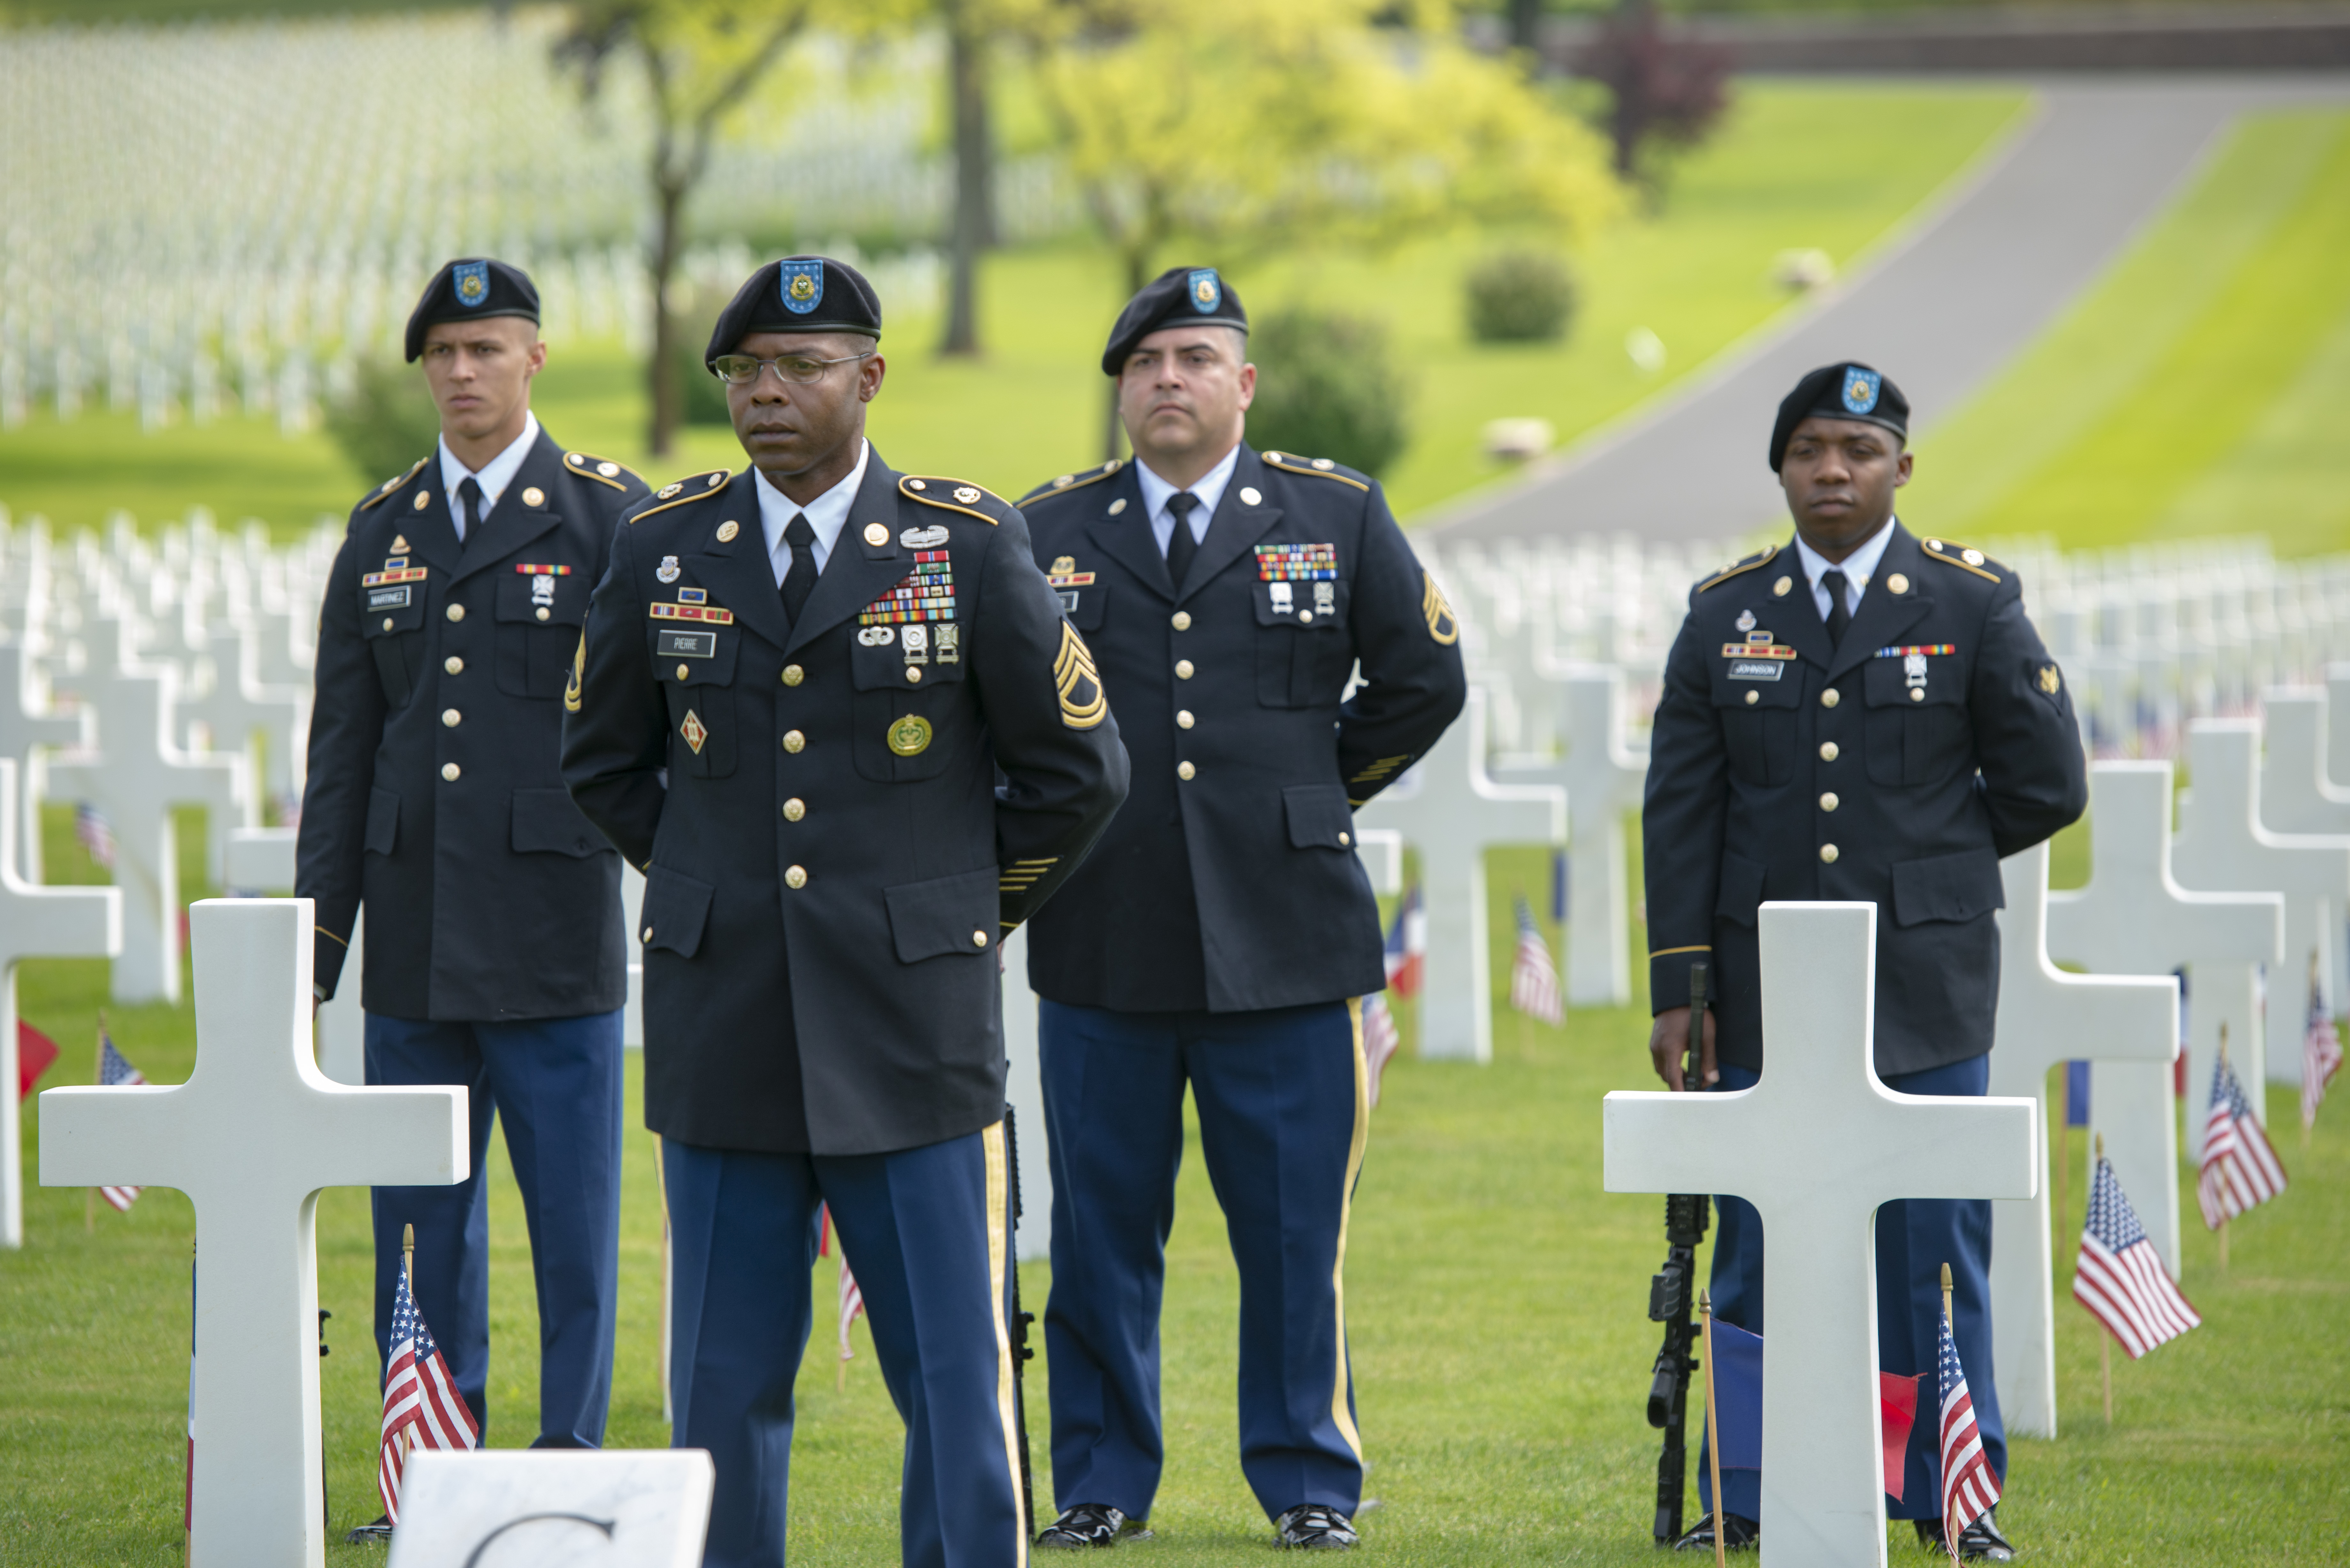 2019 Memorial Day ceremony at Lorraine American Cemetery ©U.S. Army- Staff Sgt. Anri Baril